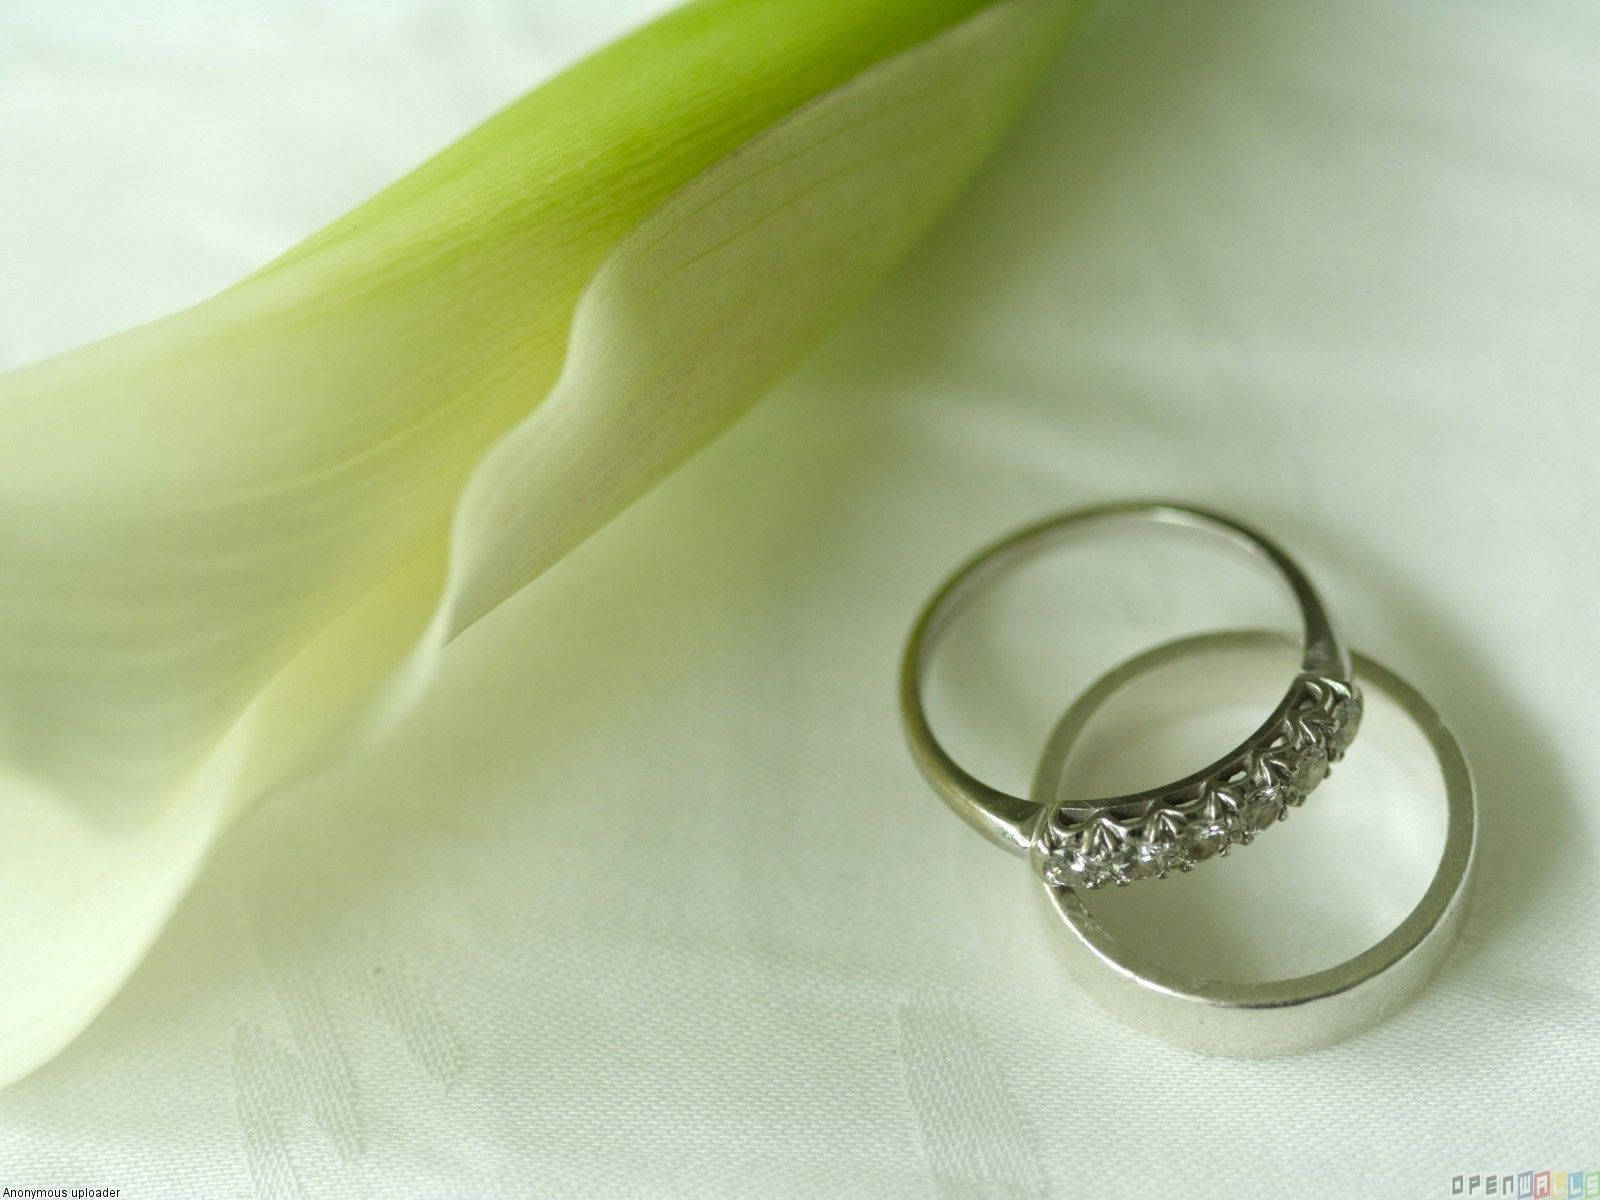 Wedding Rings 1600X1200 Wallpaper and Background Image